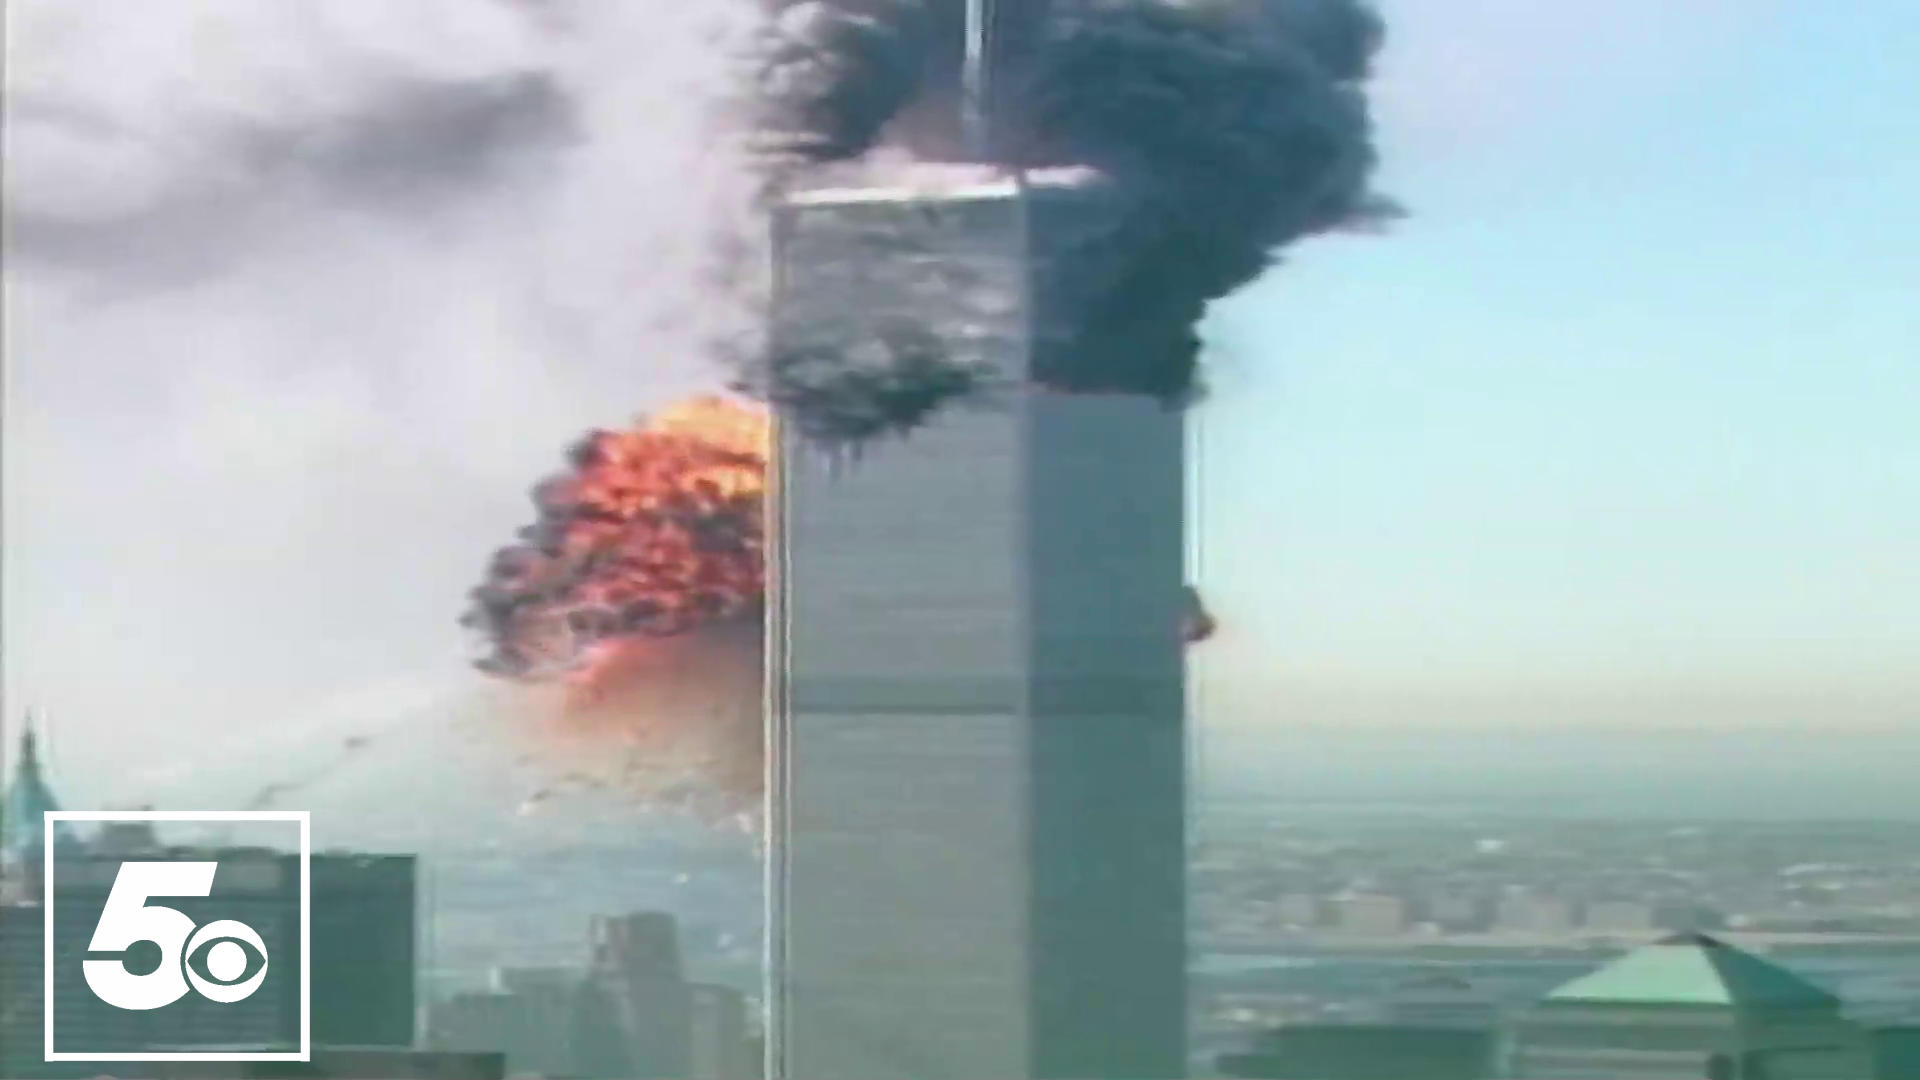 In this week's 5NEWS Vault, take a look back at how America came together following the Sept. 11, 2001 attacks.